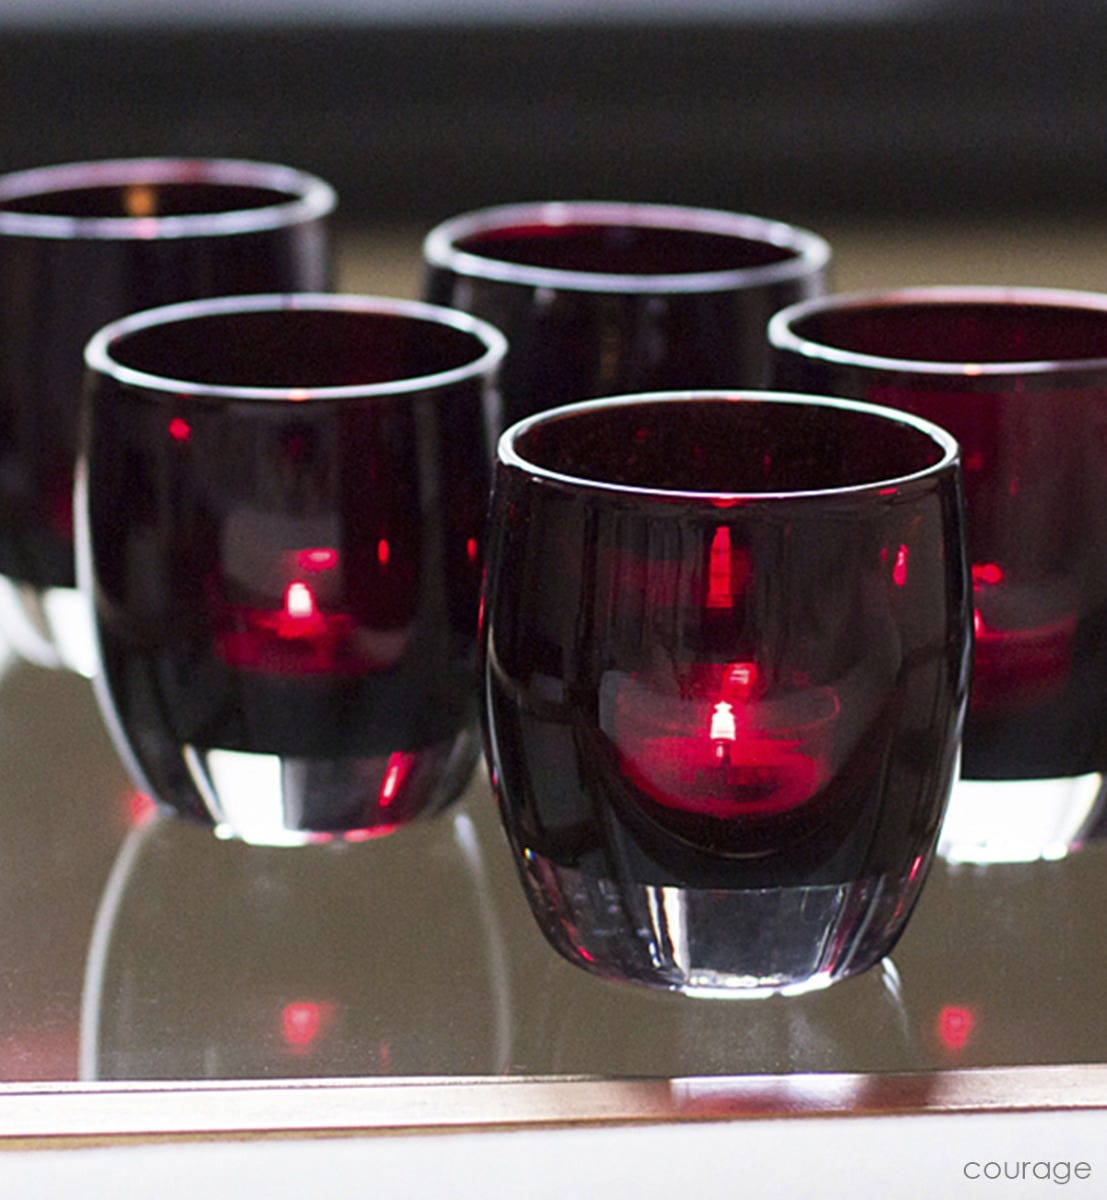 courage, translucent mahogany red, hand-blown glass votive candle holder.